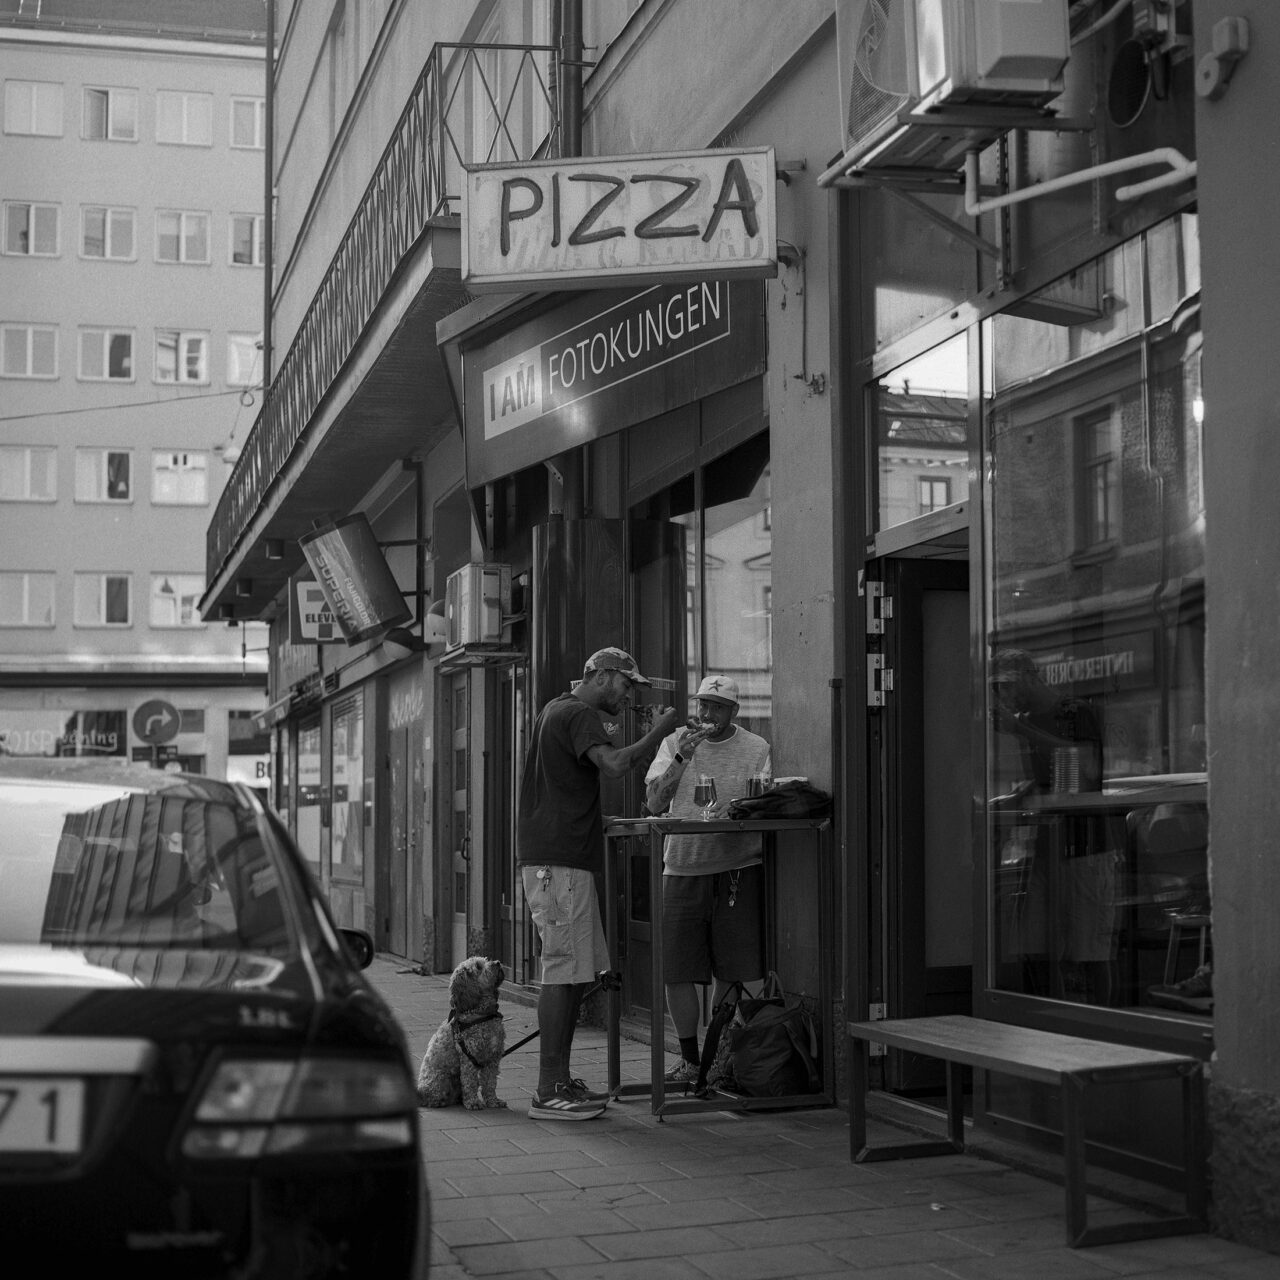 Two people eating a slice of pizza in the street outside a small restaurant.